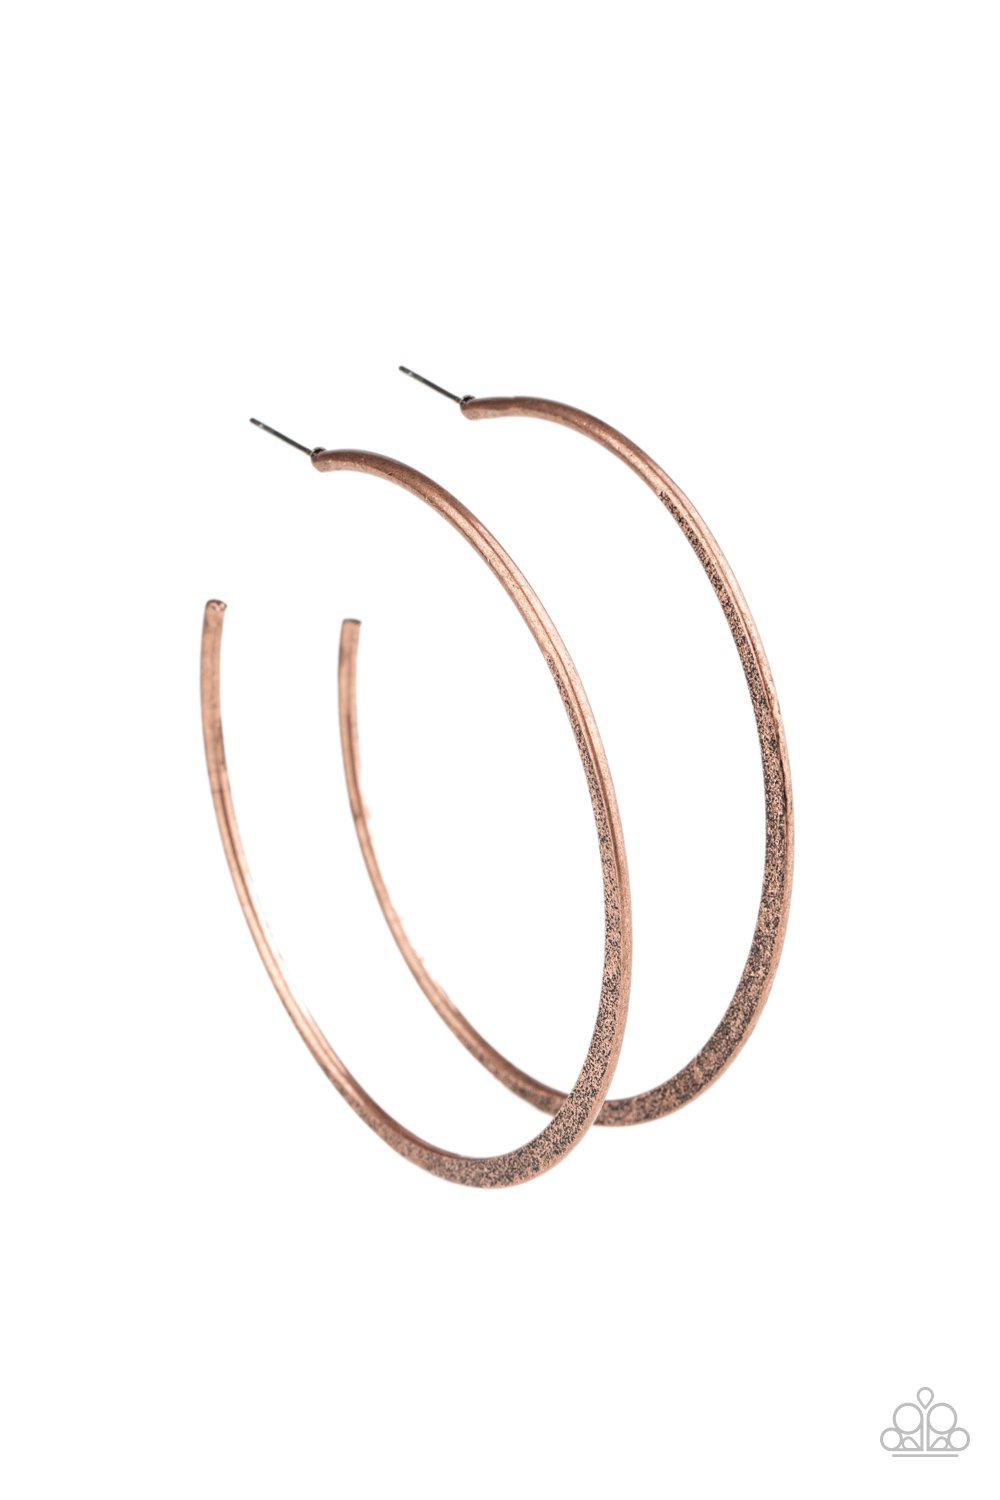 Flat Spin Copper Hoop Earrings - Paparazzi Accessories- lightbox - CarasShop.com - $5 Jewelry by Cara Jewels